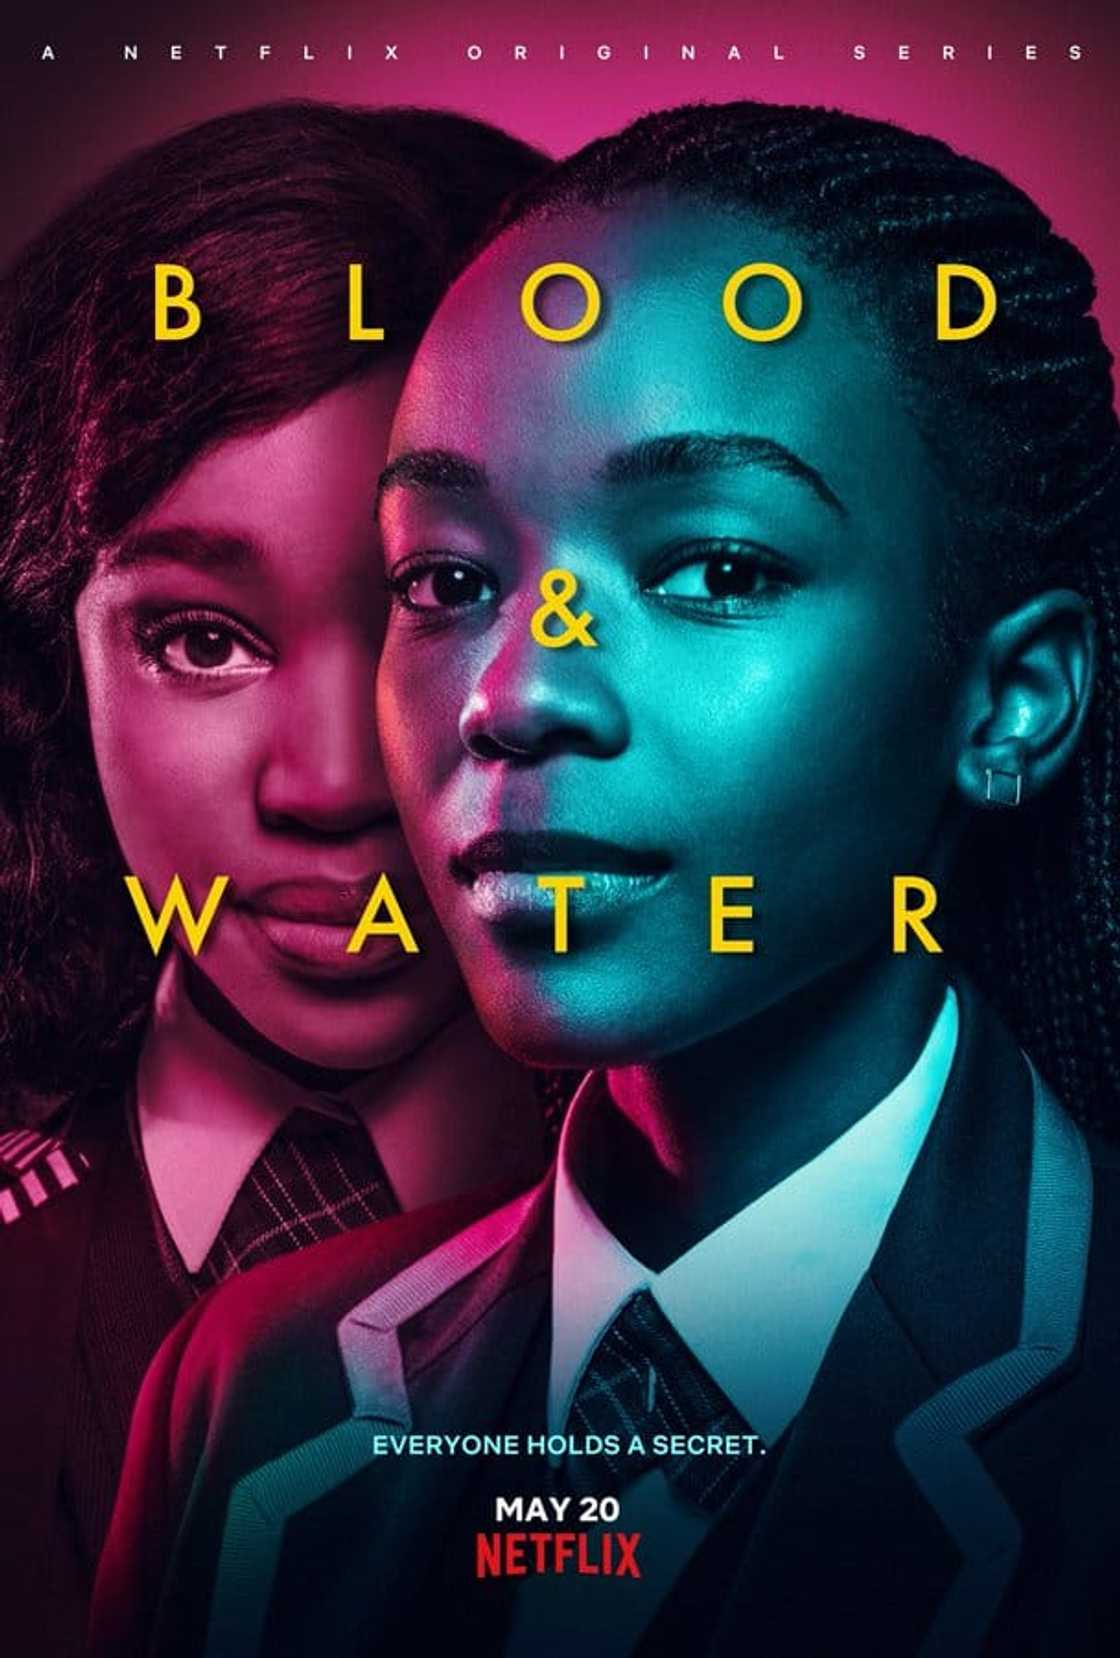 how many episodes in blood and water?